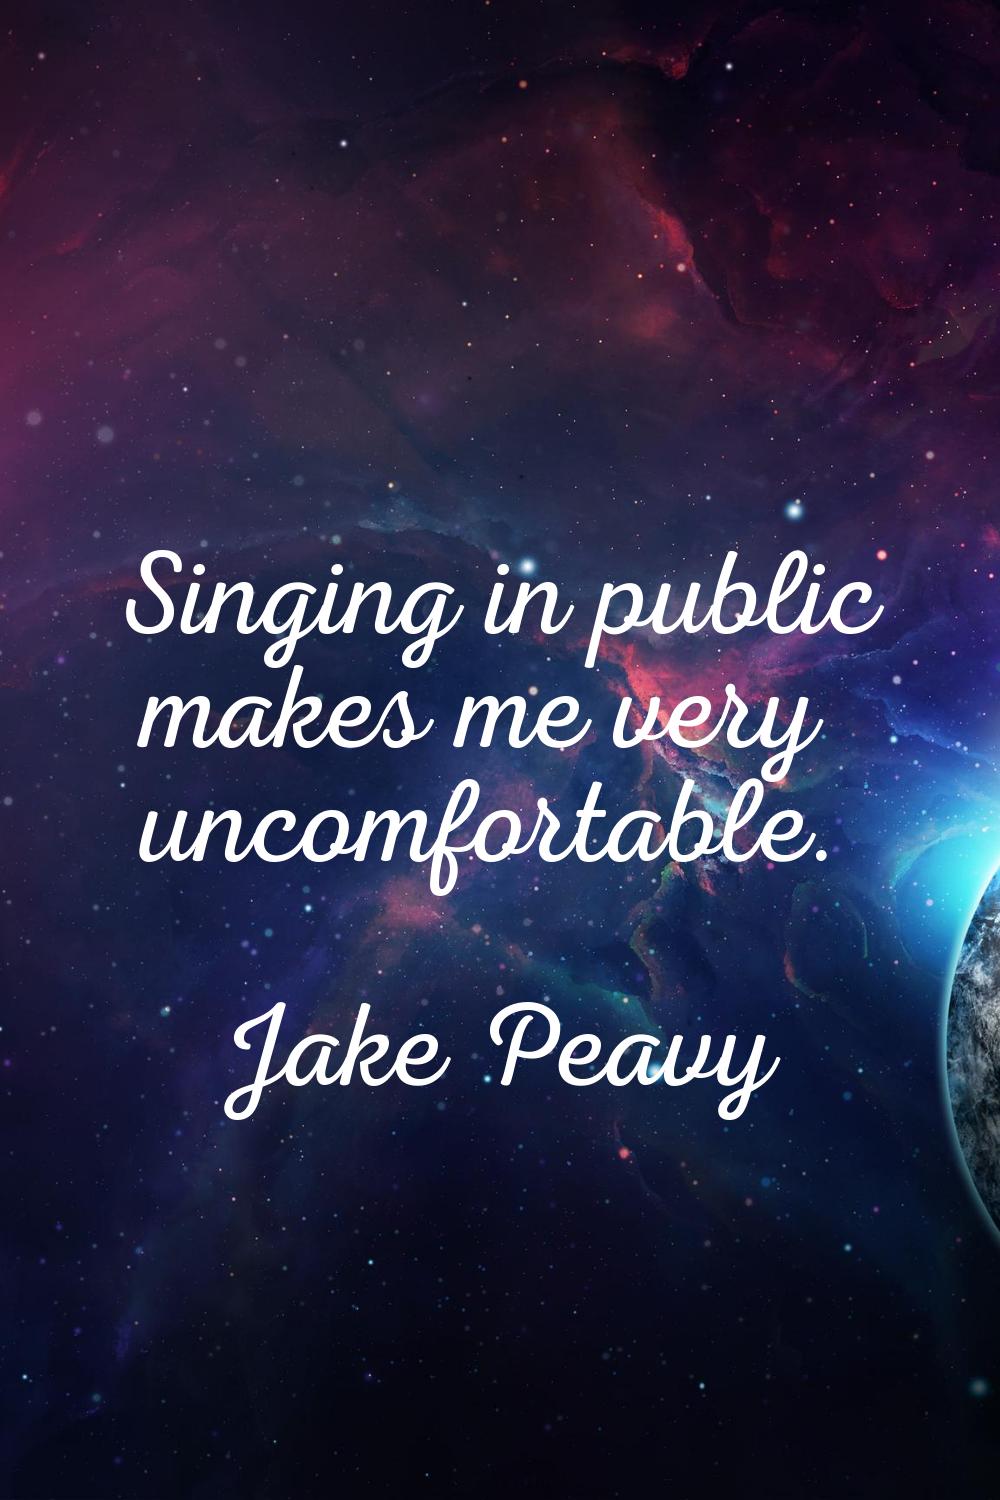 Singing in public makes me very uncomfortable.